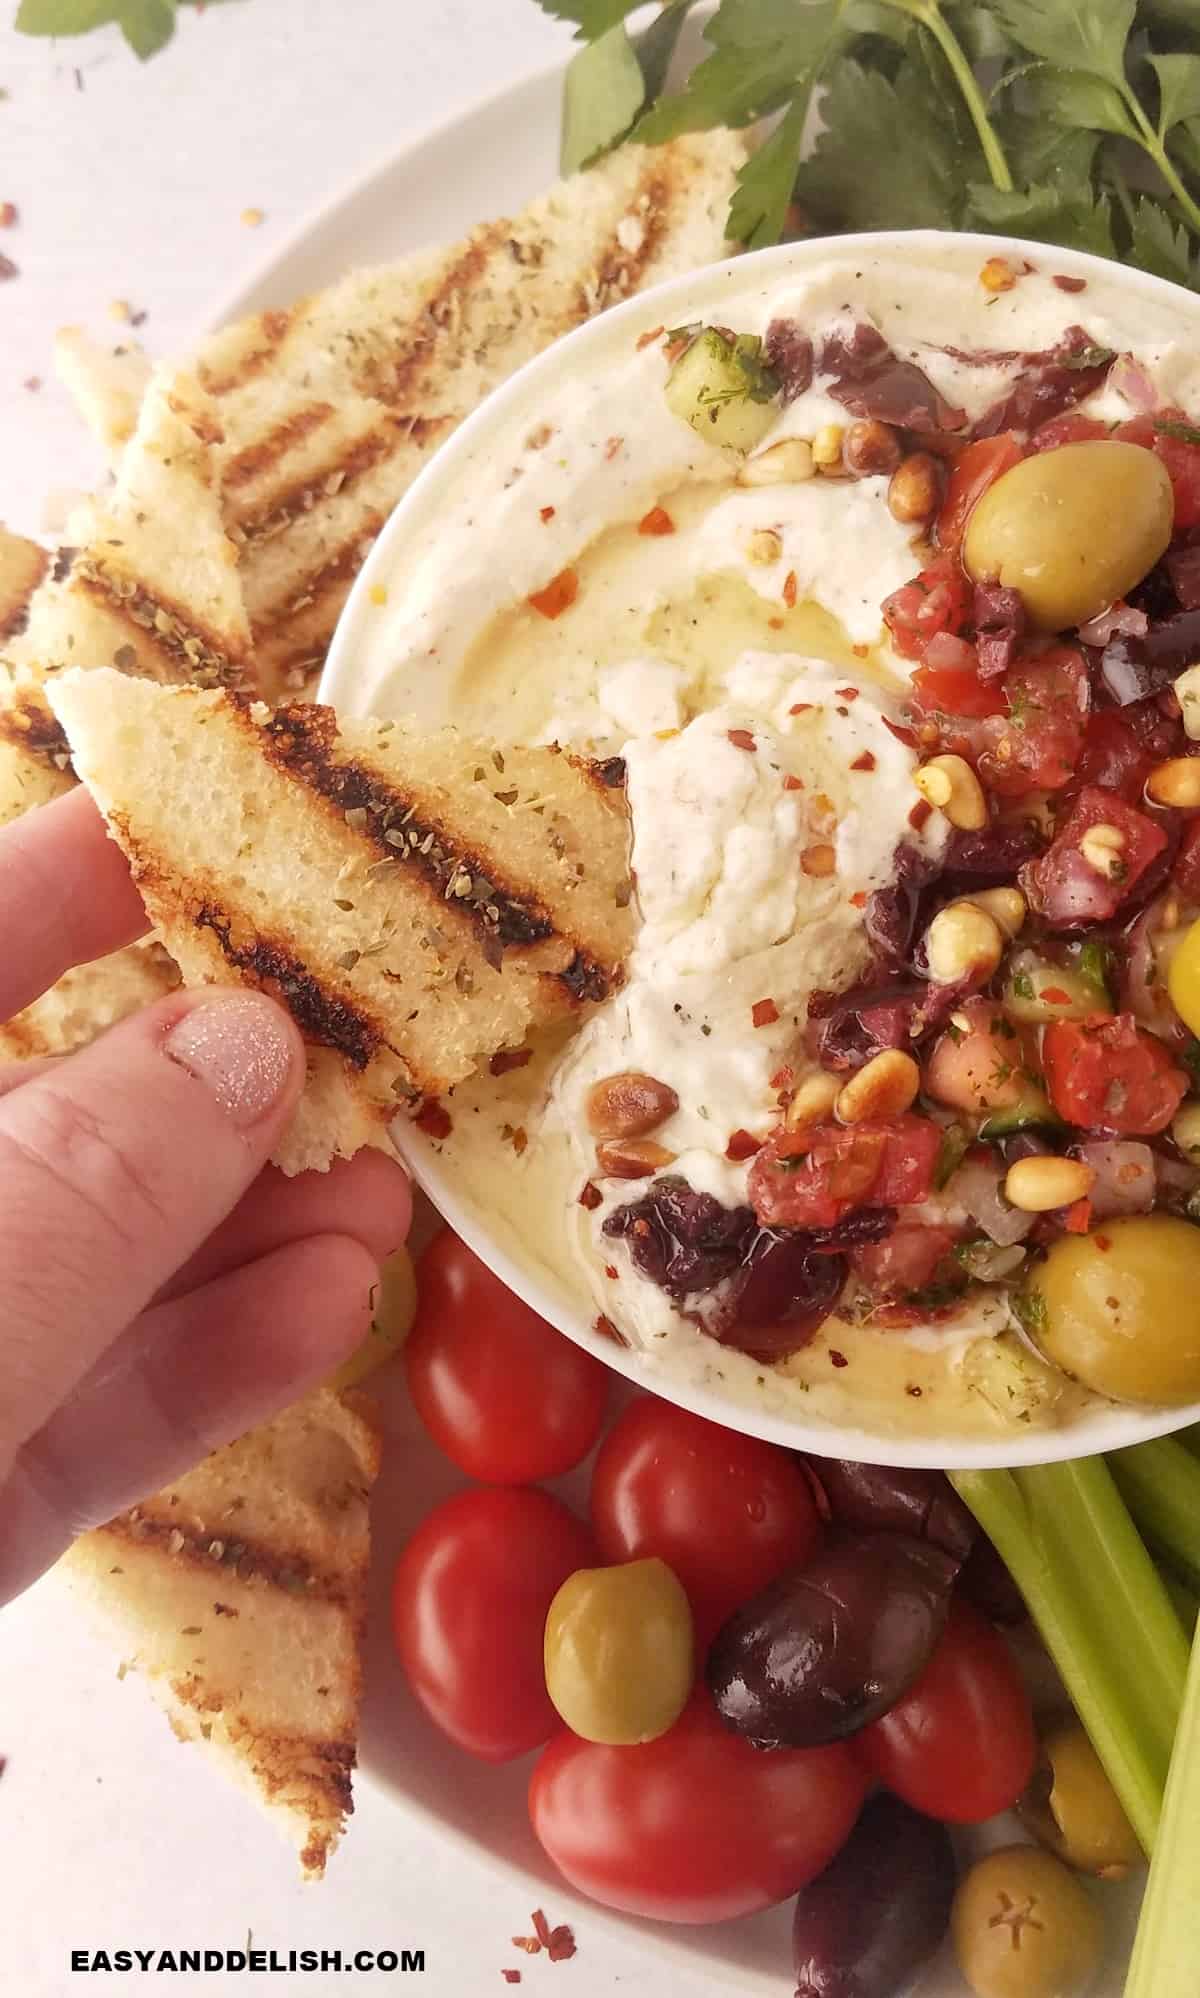 dipping toast in whipped rcotta dip.